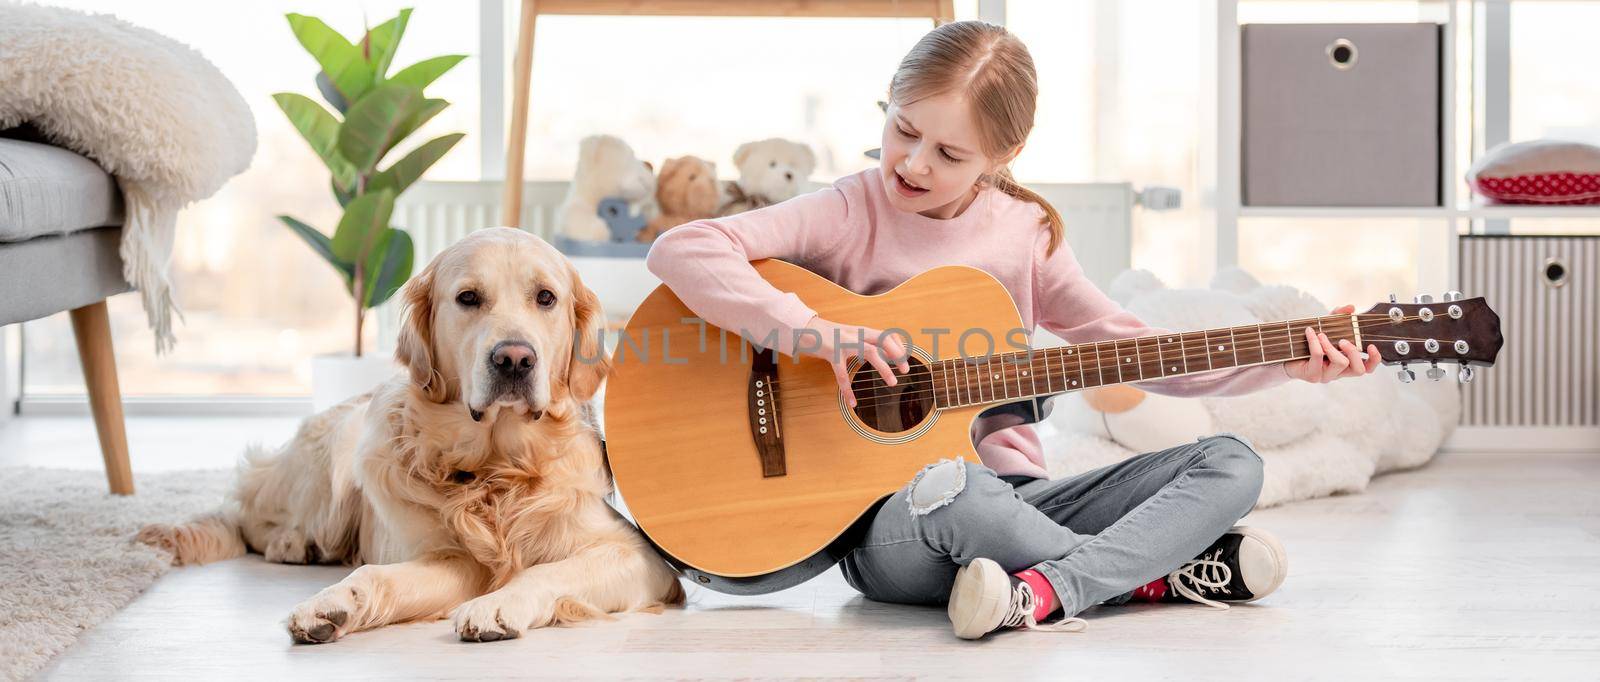 Little girl playing music on guitar and golden retriever dog lying next to her in sunny room